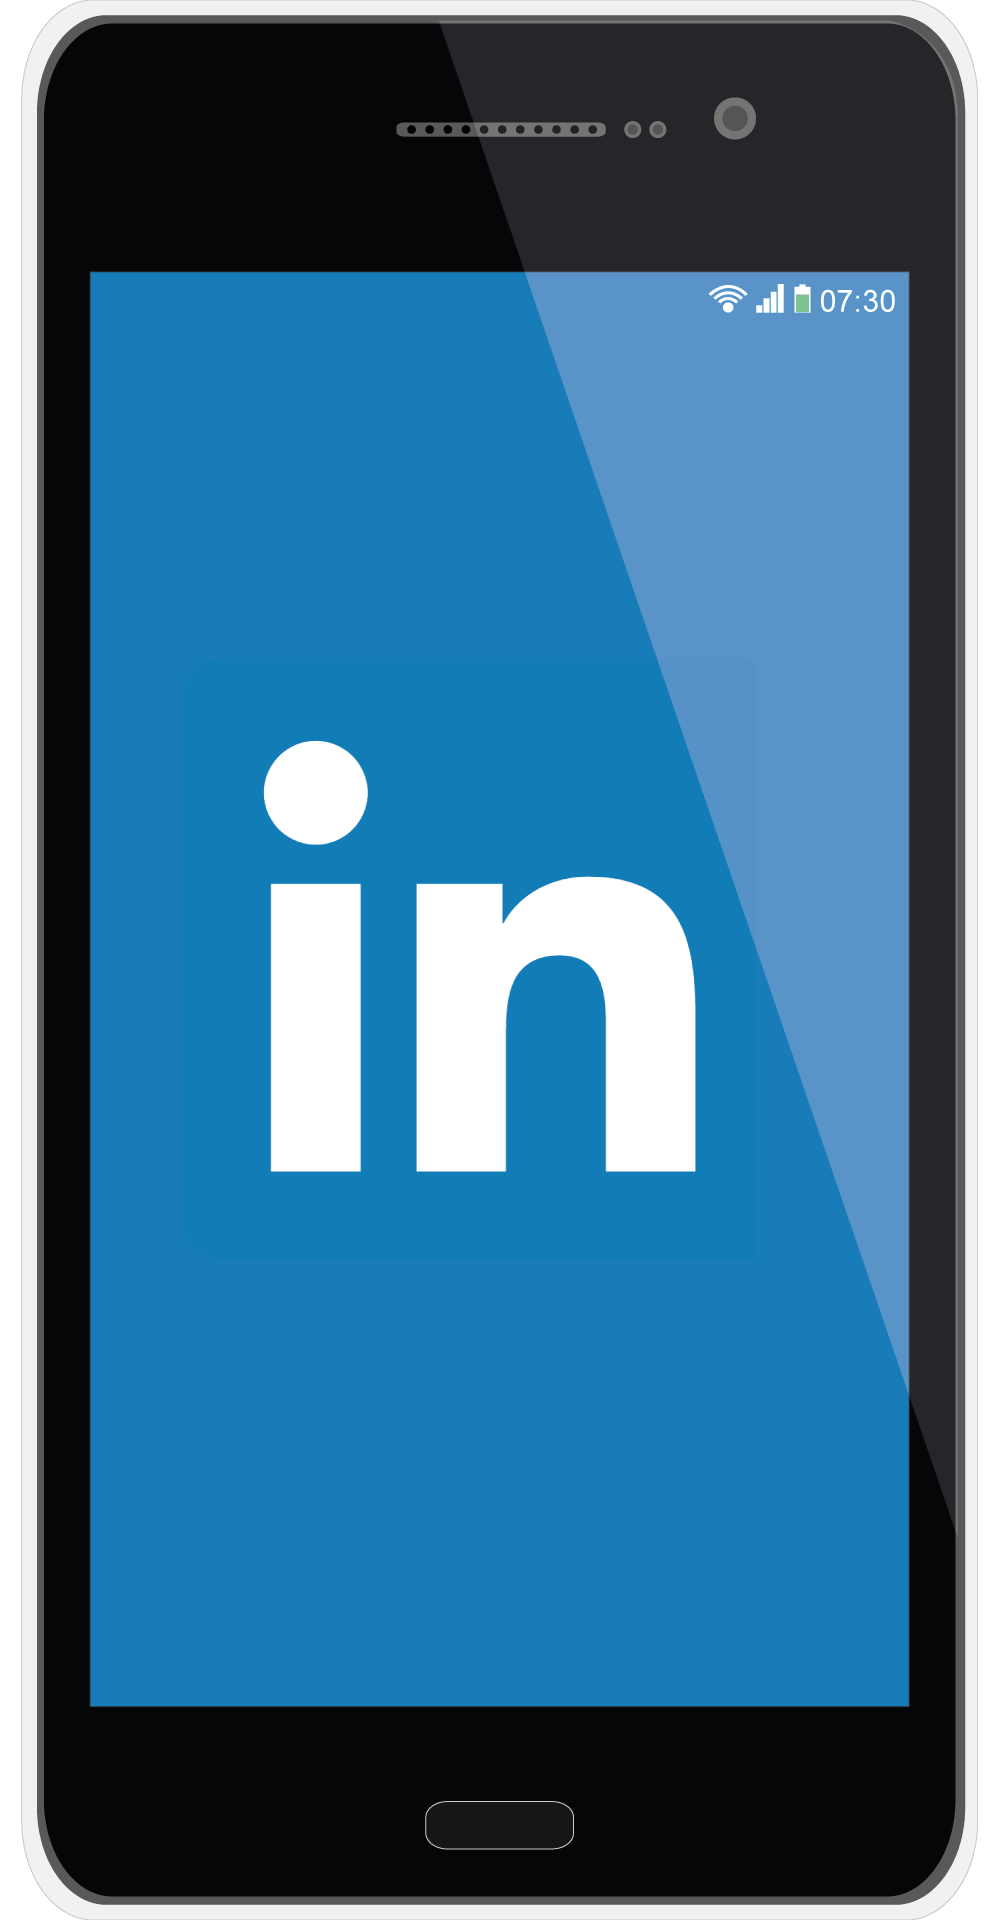 How to update LinkedIn when you lost your job